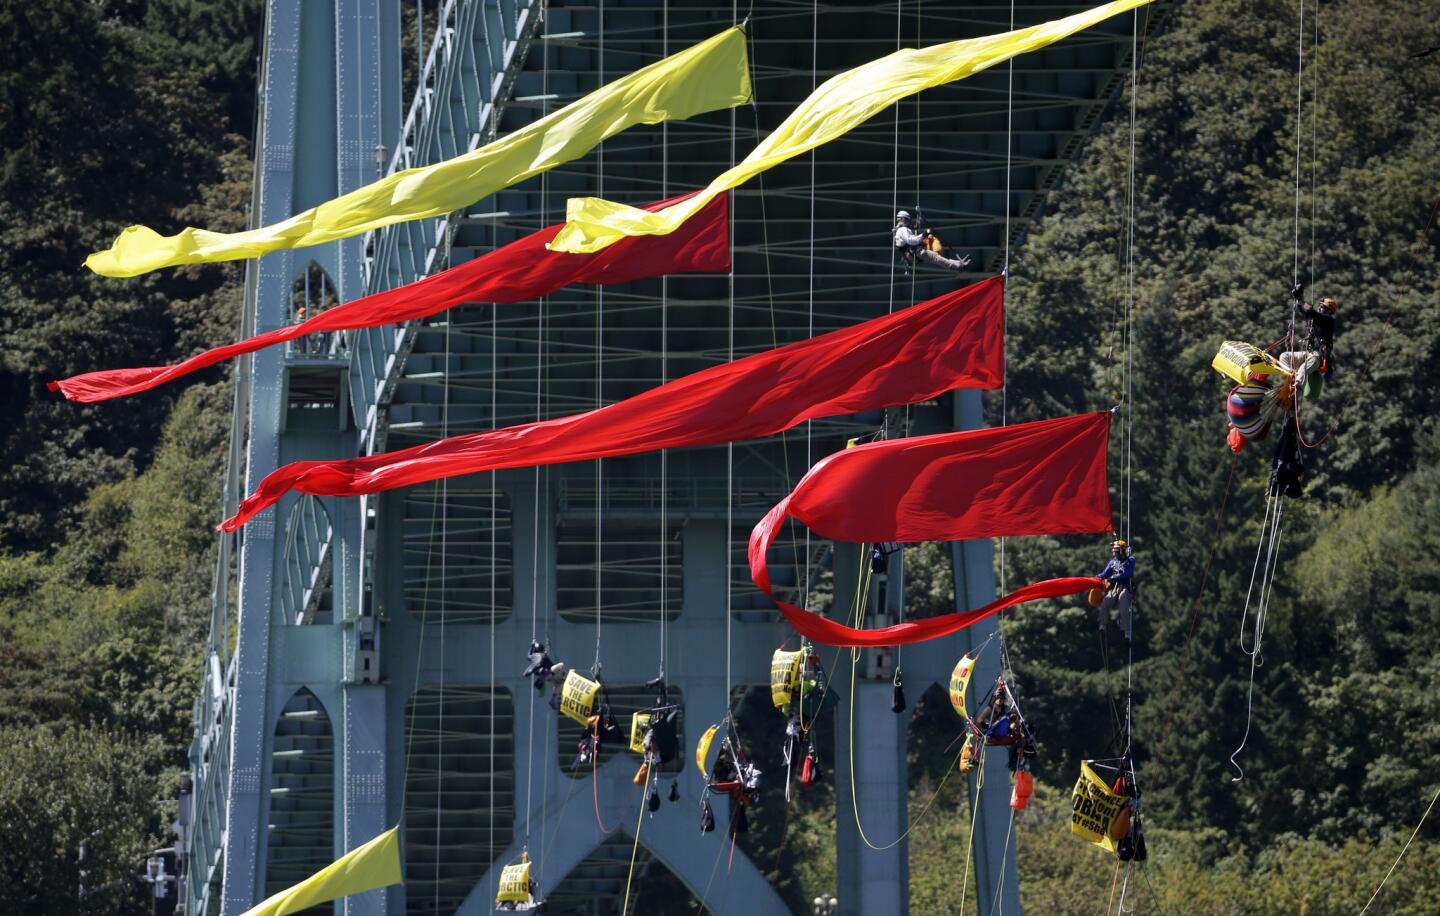 Activists unfurl colored banners while hanging from the St. Johns bridge in Portland, Ore., on July 29.